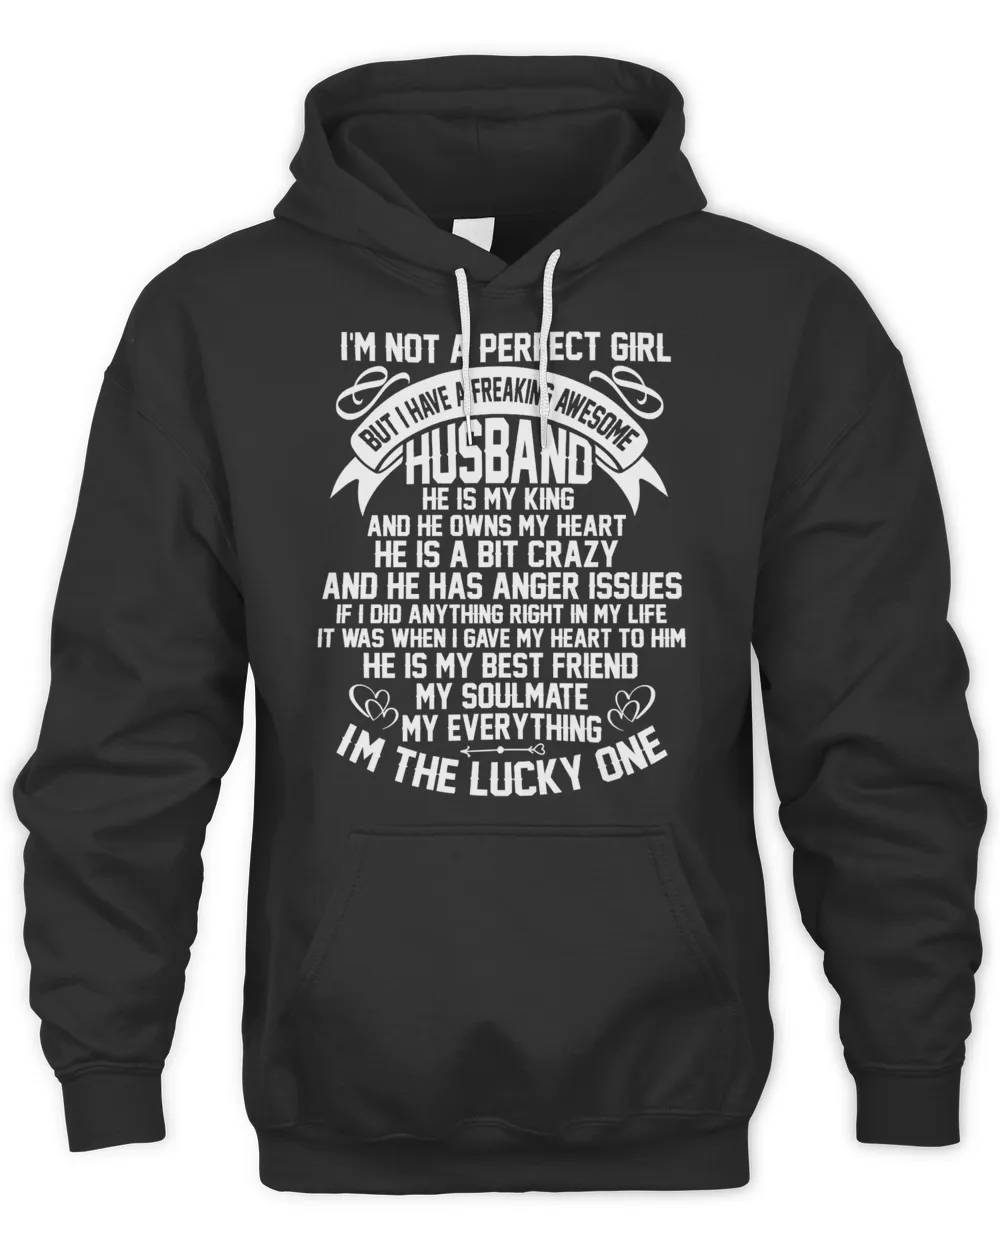 Husband Family Wife Im Not A Perfect Girl But I Have A Freaking Awesome Husband128 Couple